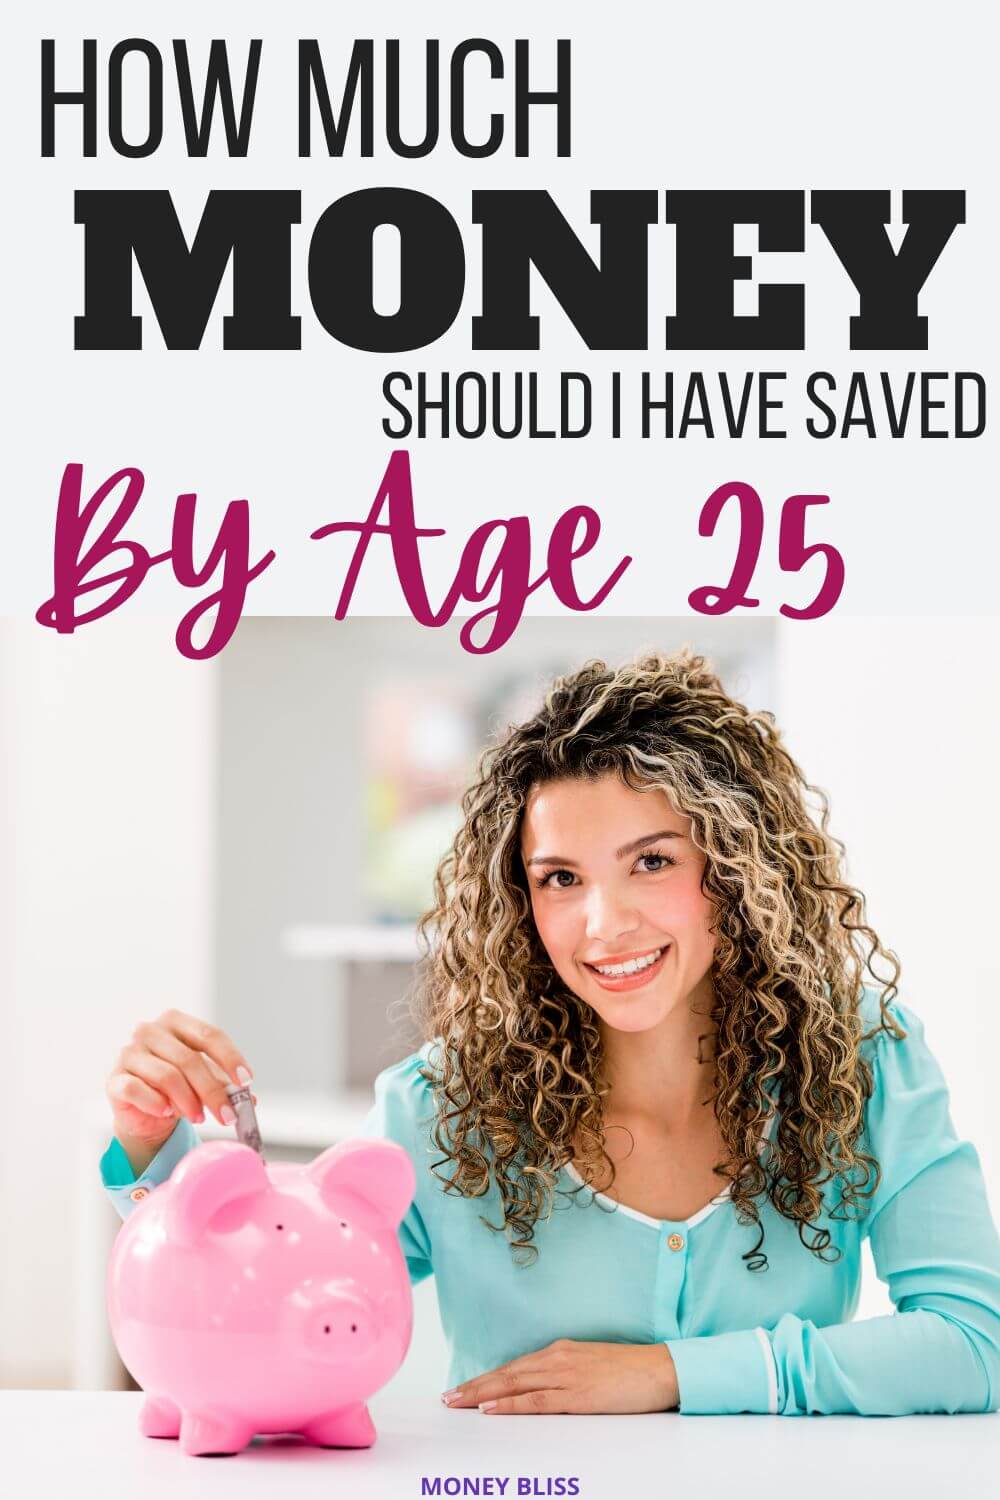 How Much Money Should I Have Saved by 25?